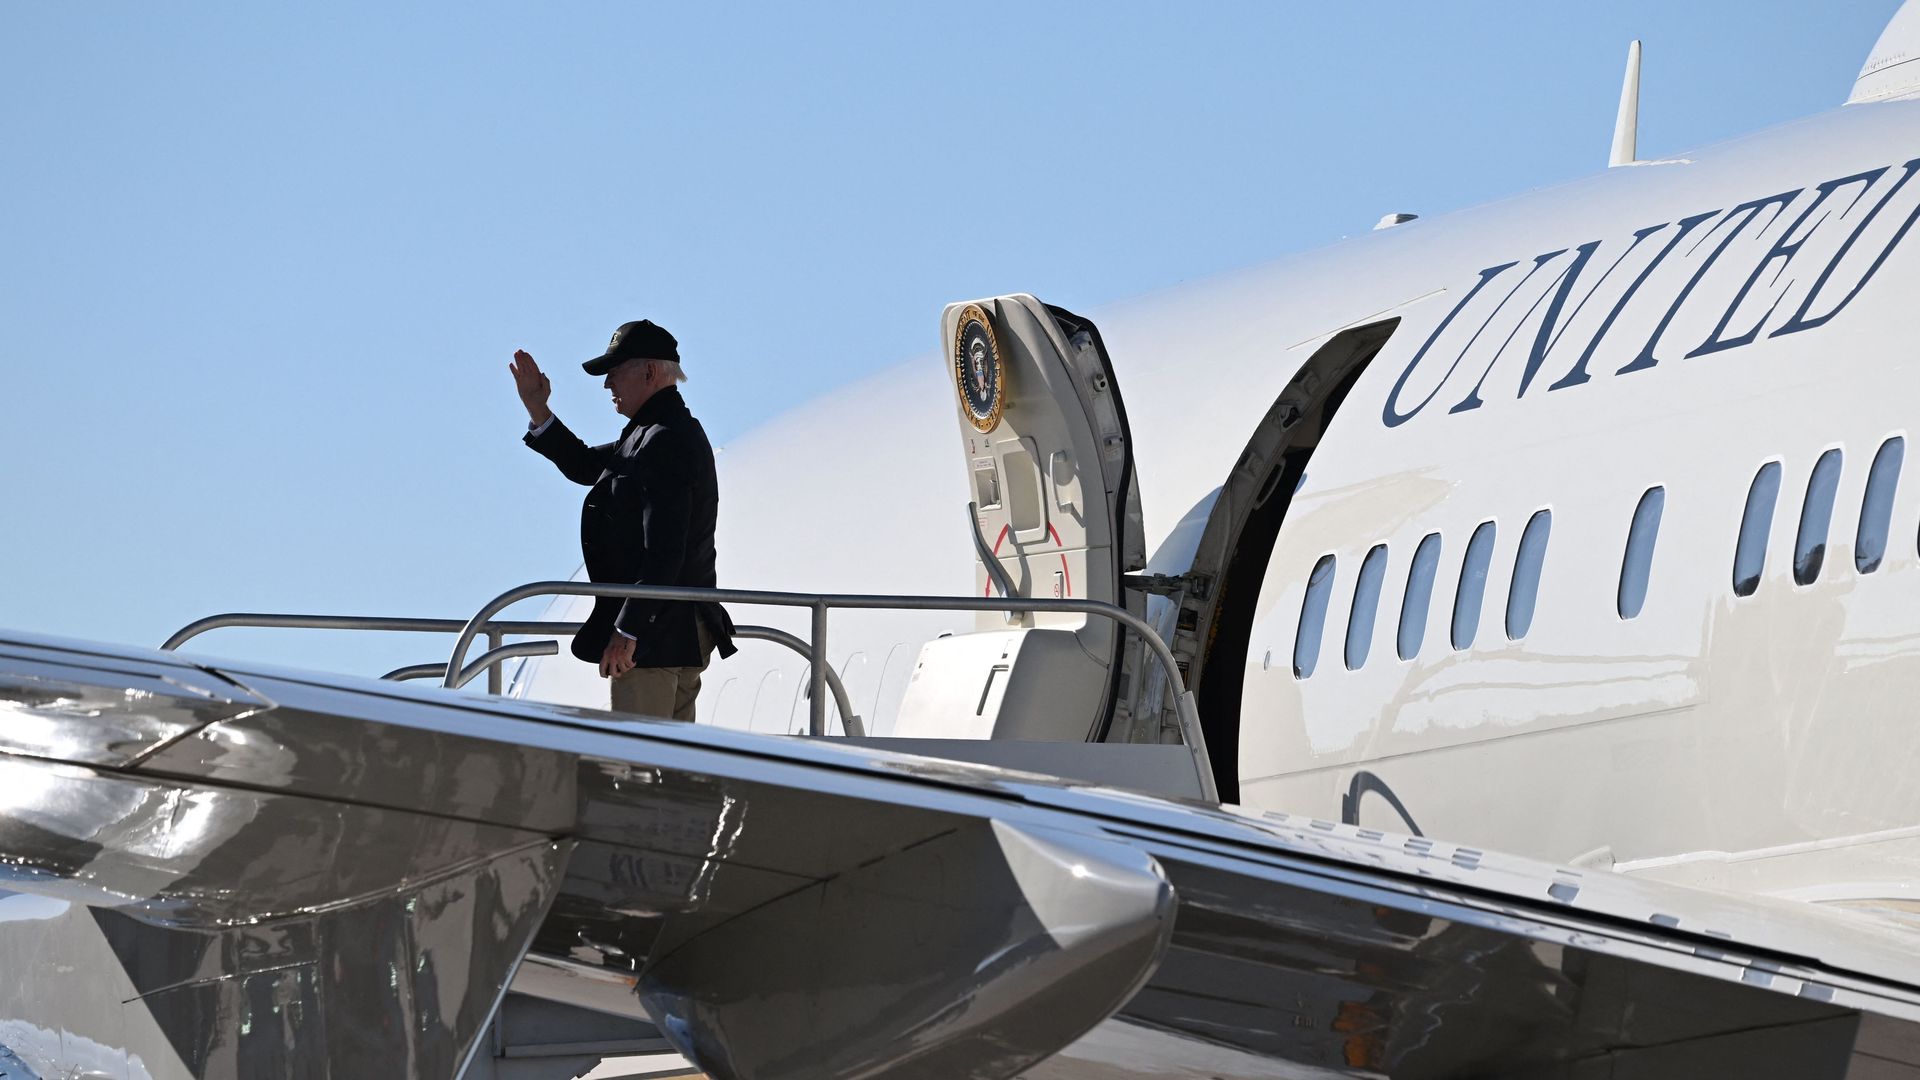 Biden waves as he steps off Air Force One